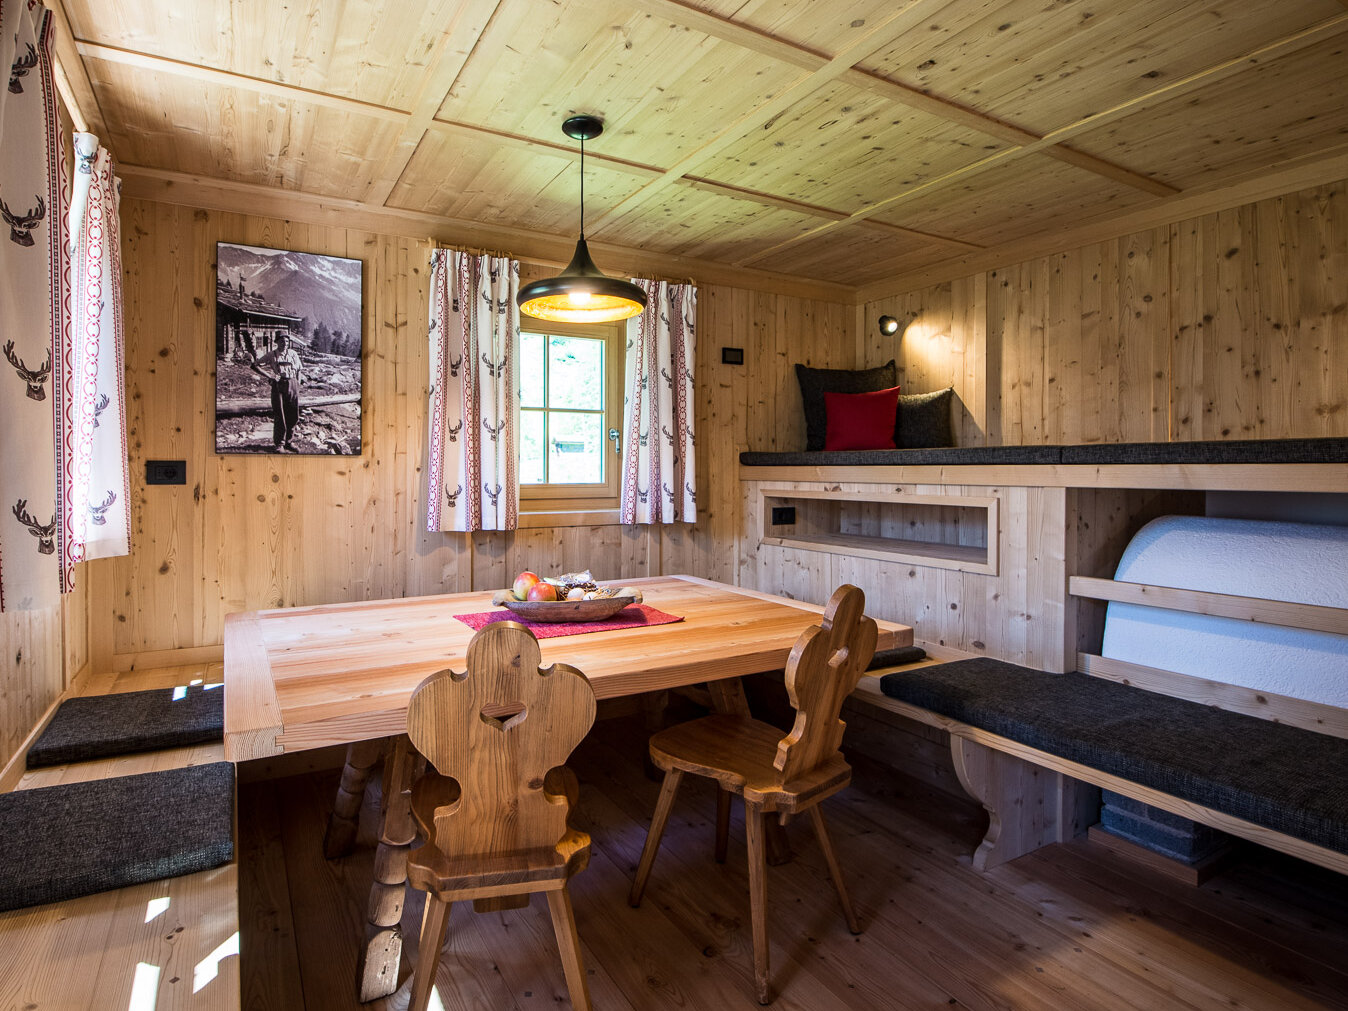 TYROLEAN STYLE LIVING AREA WITH FARMER’S OVEN – WOOD PROVIDED